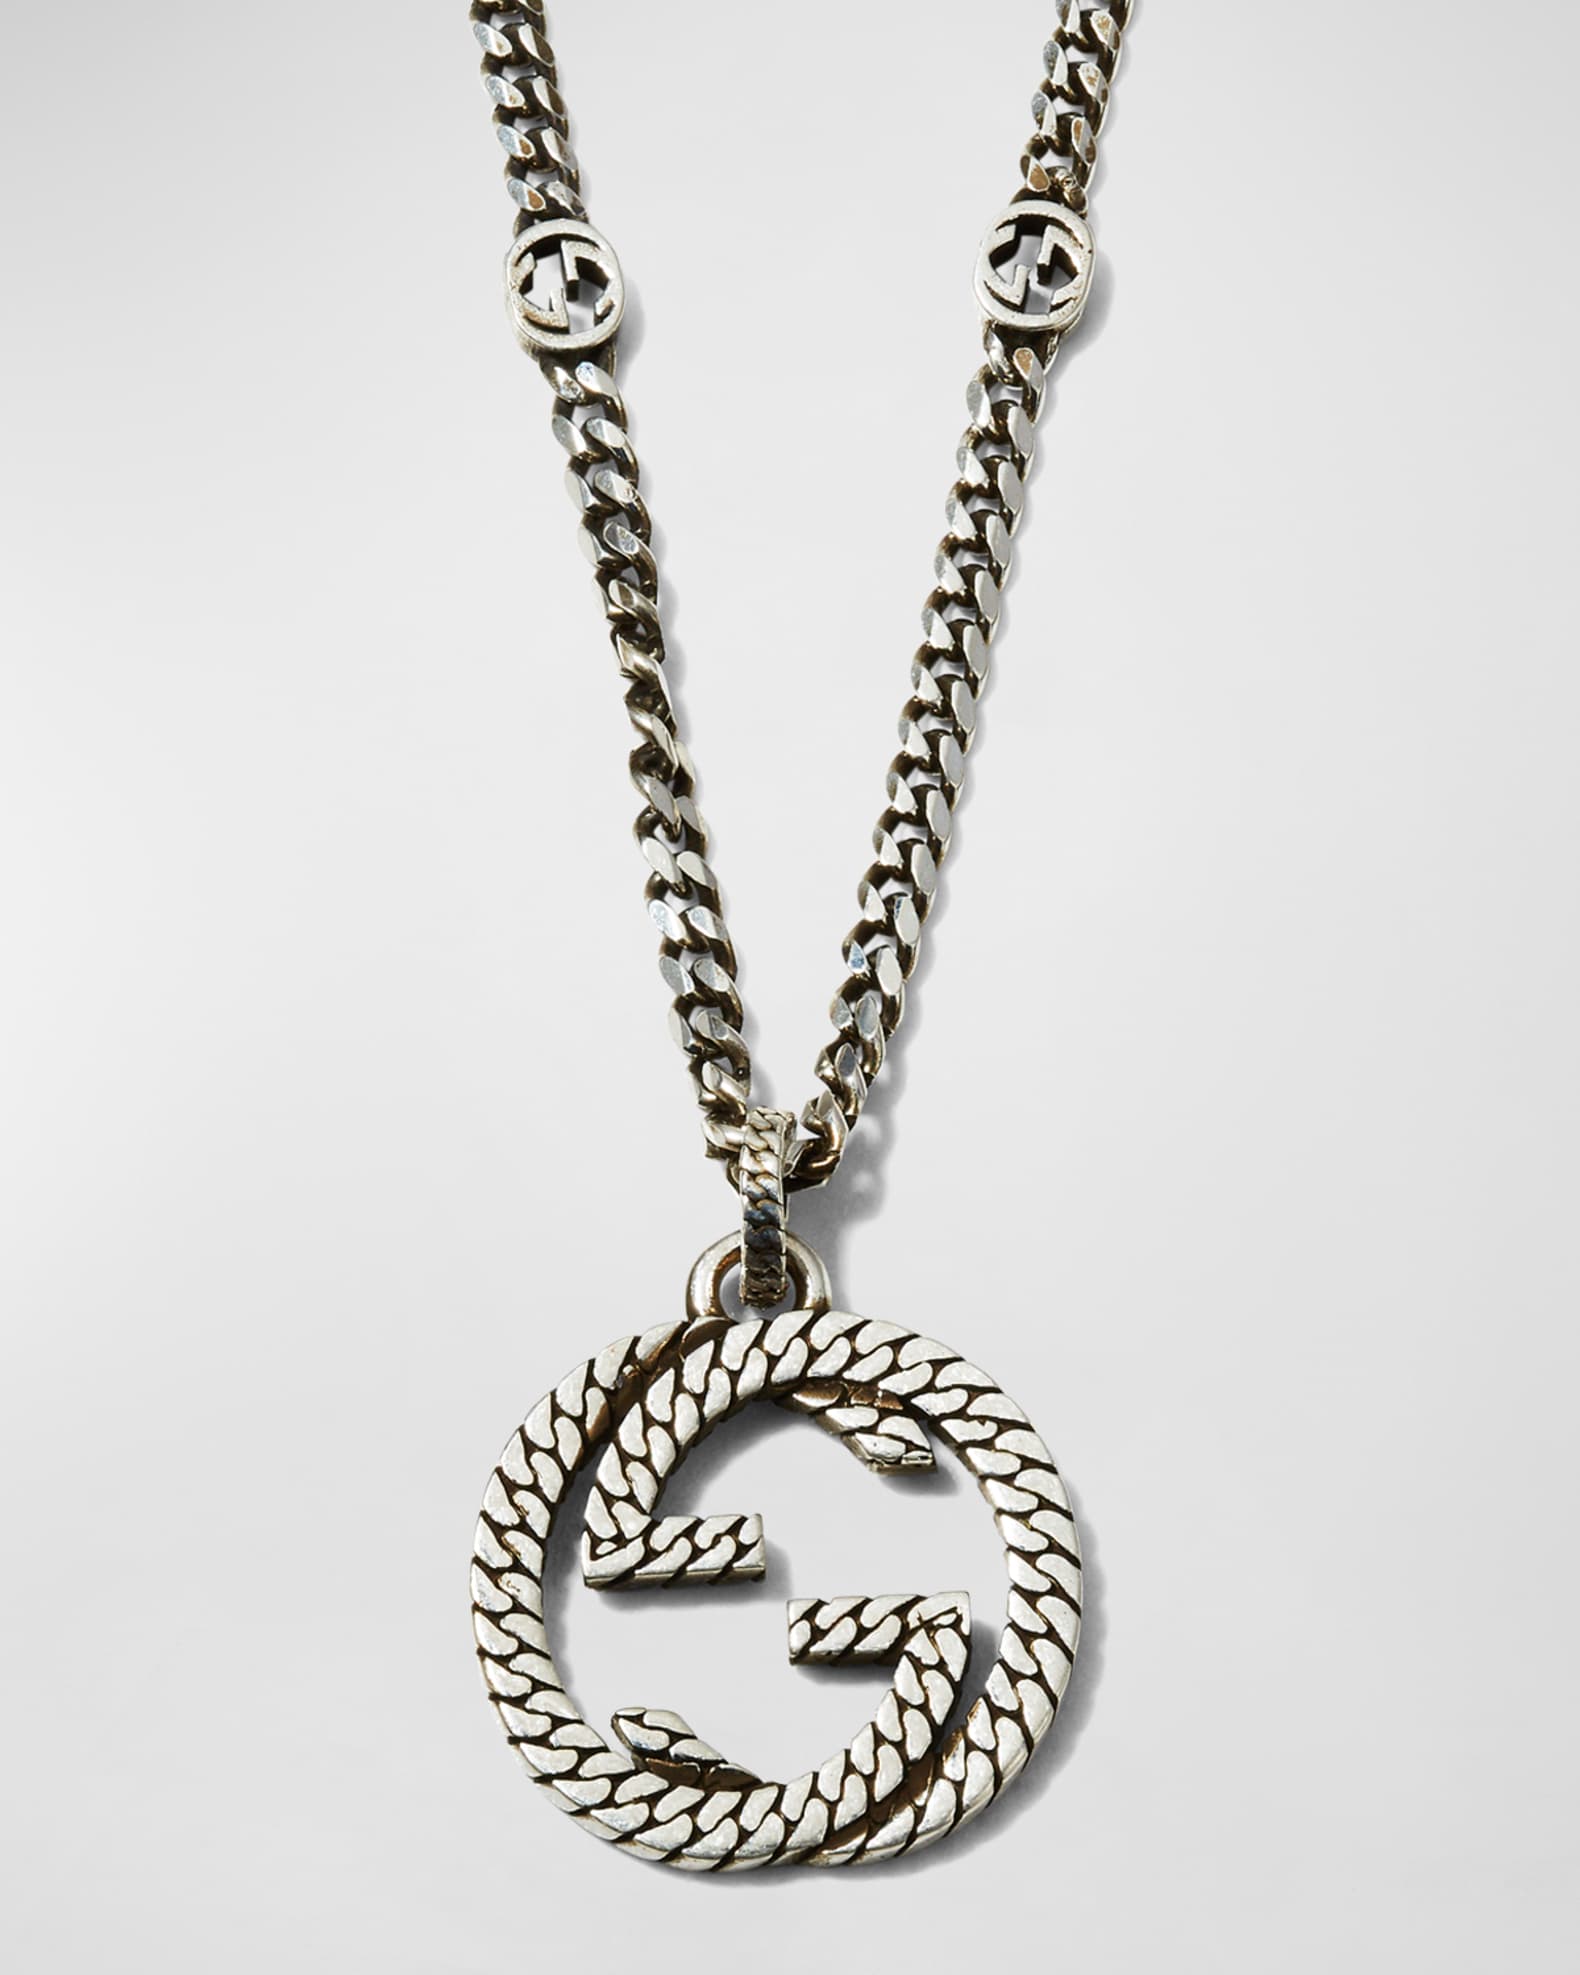 Alice Made This - Men - Sterling Silver Necklace Silver